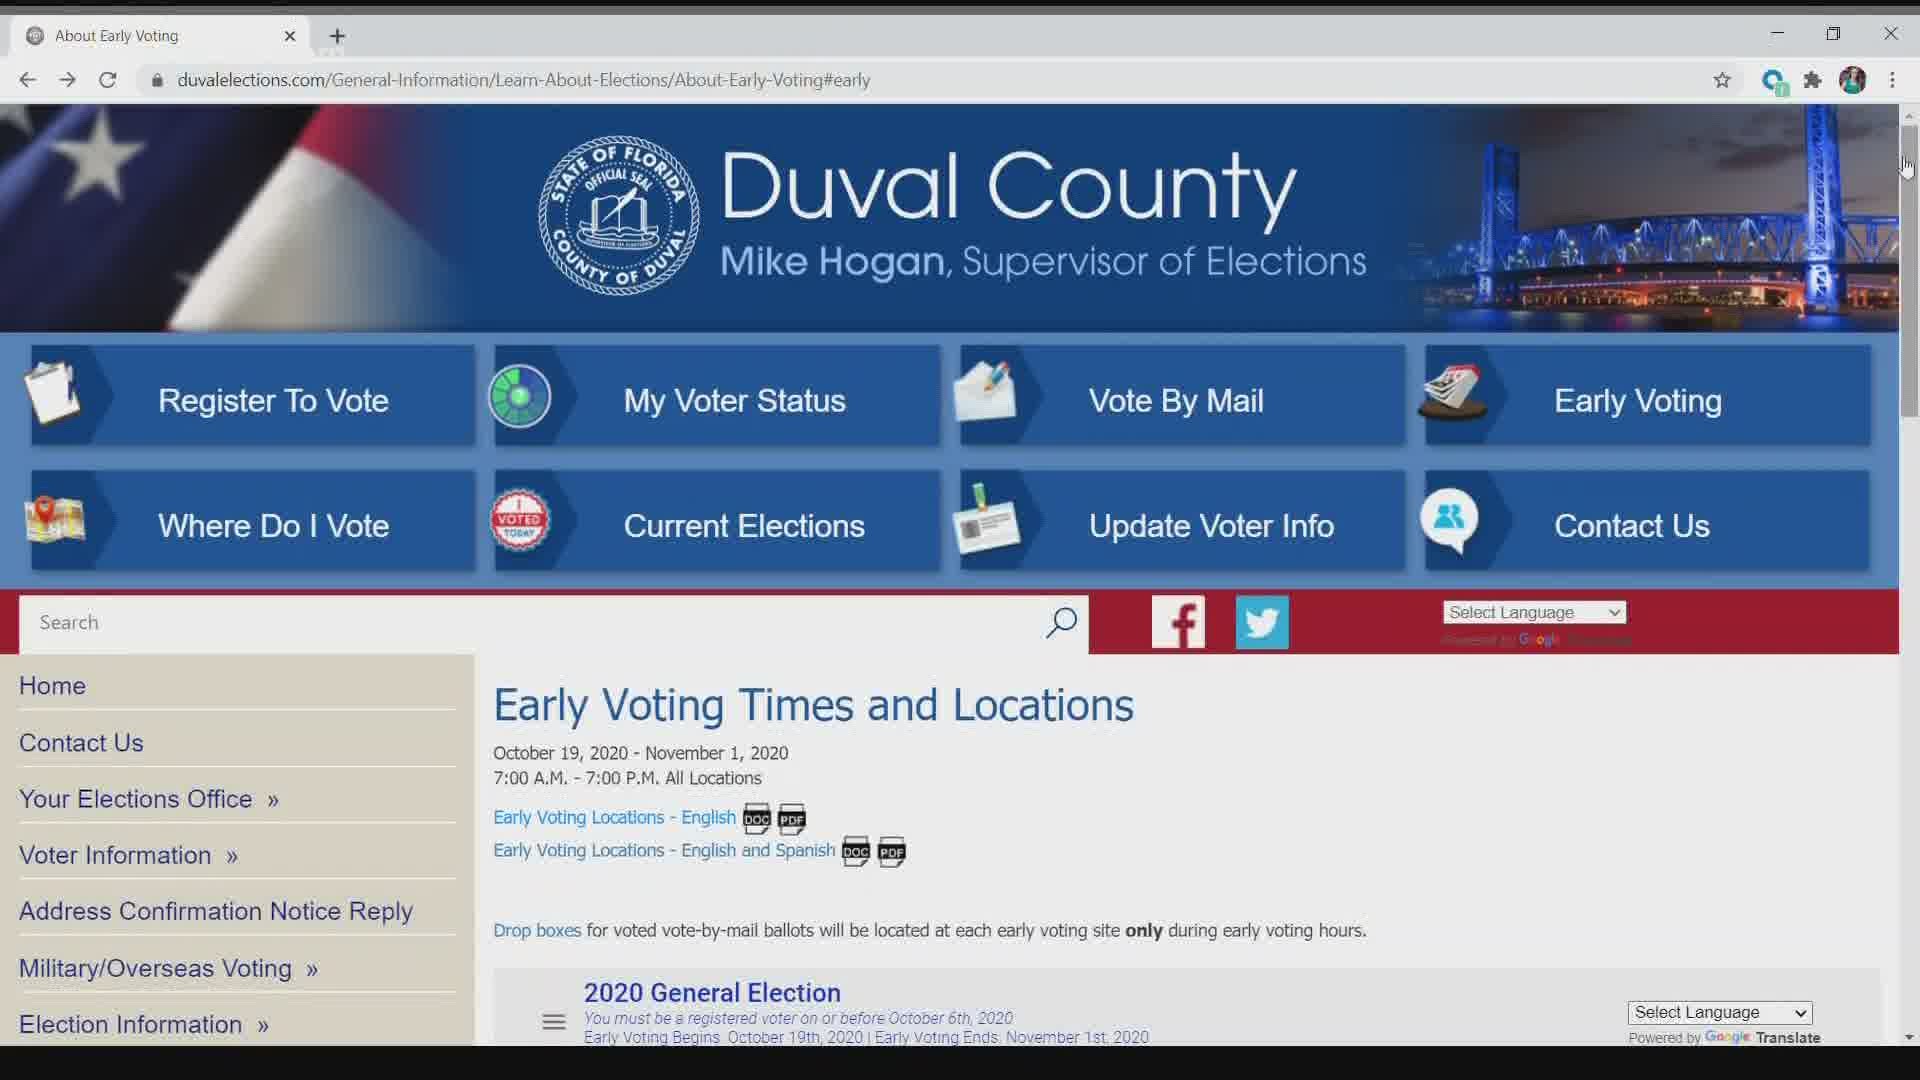 You can drop off your ballot between 7 a.m. and 7 p.m. through Sunday, which is when early voting ends in Duval County.